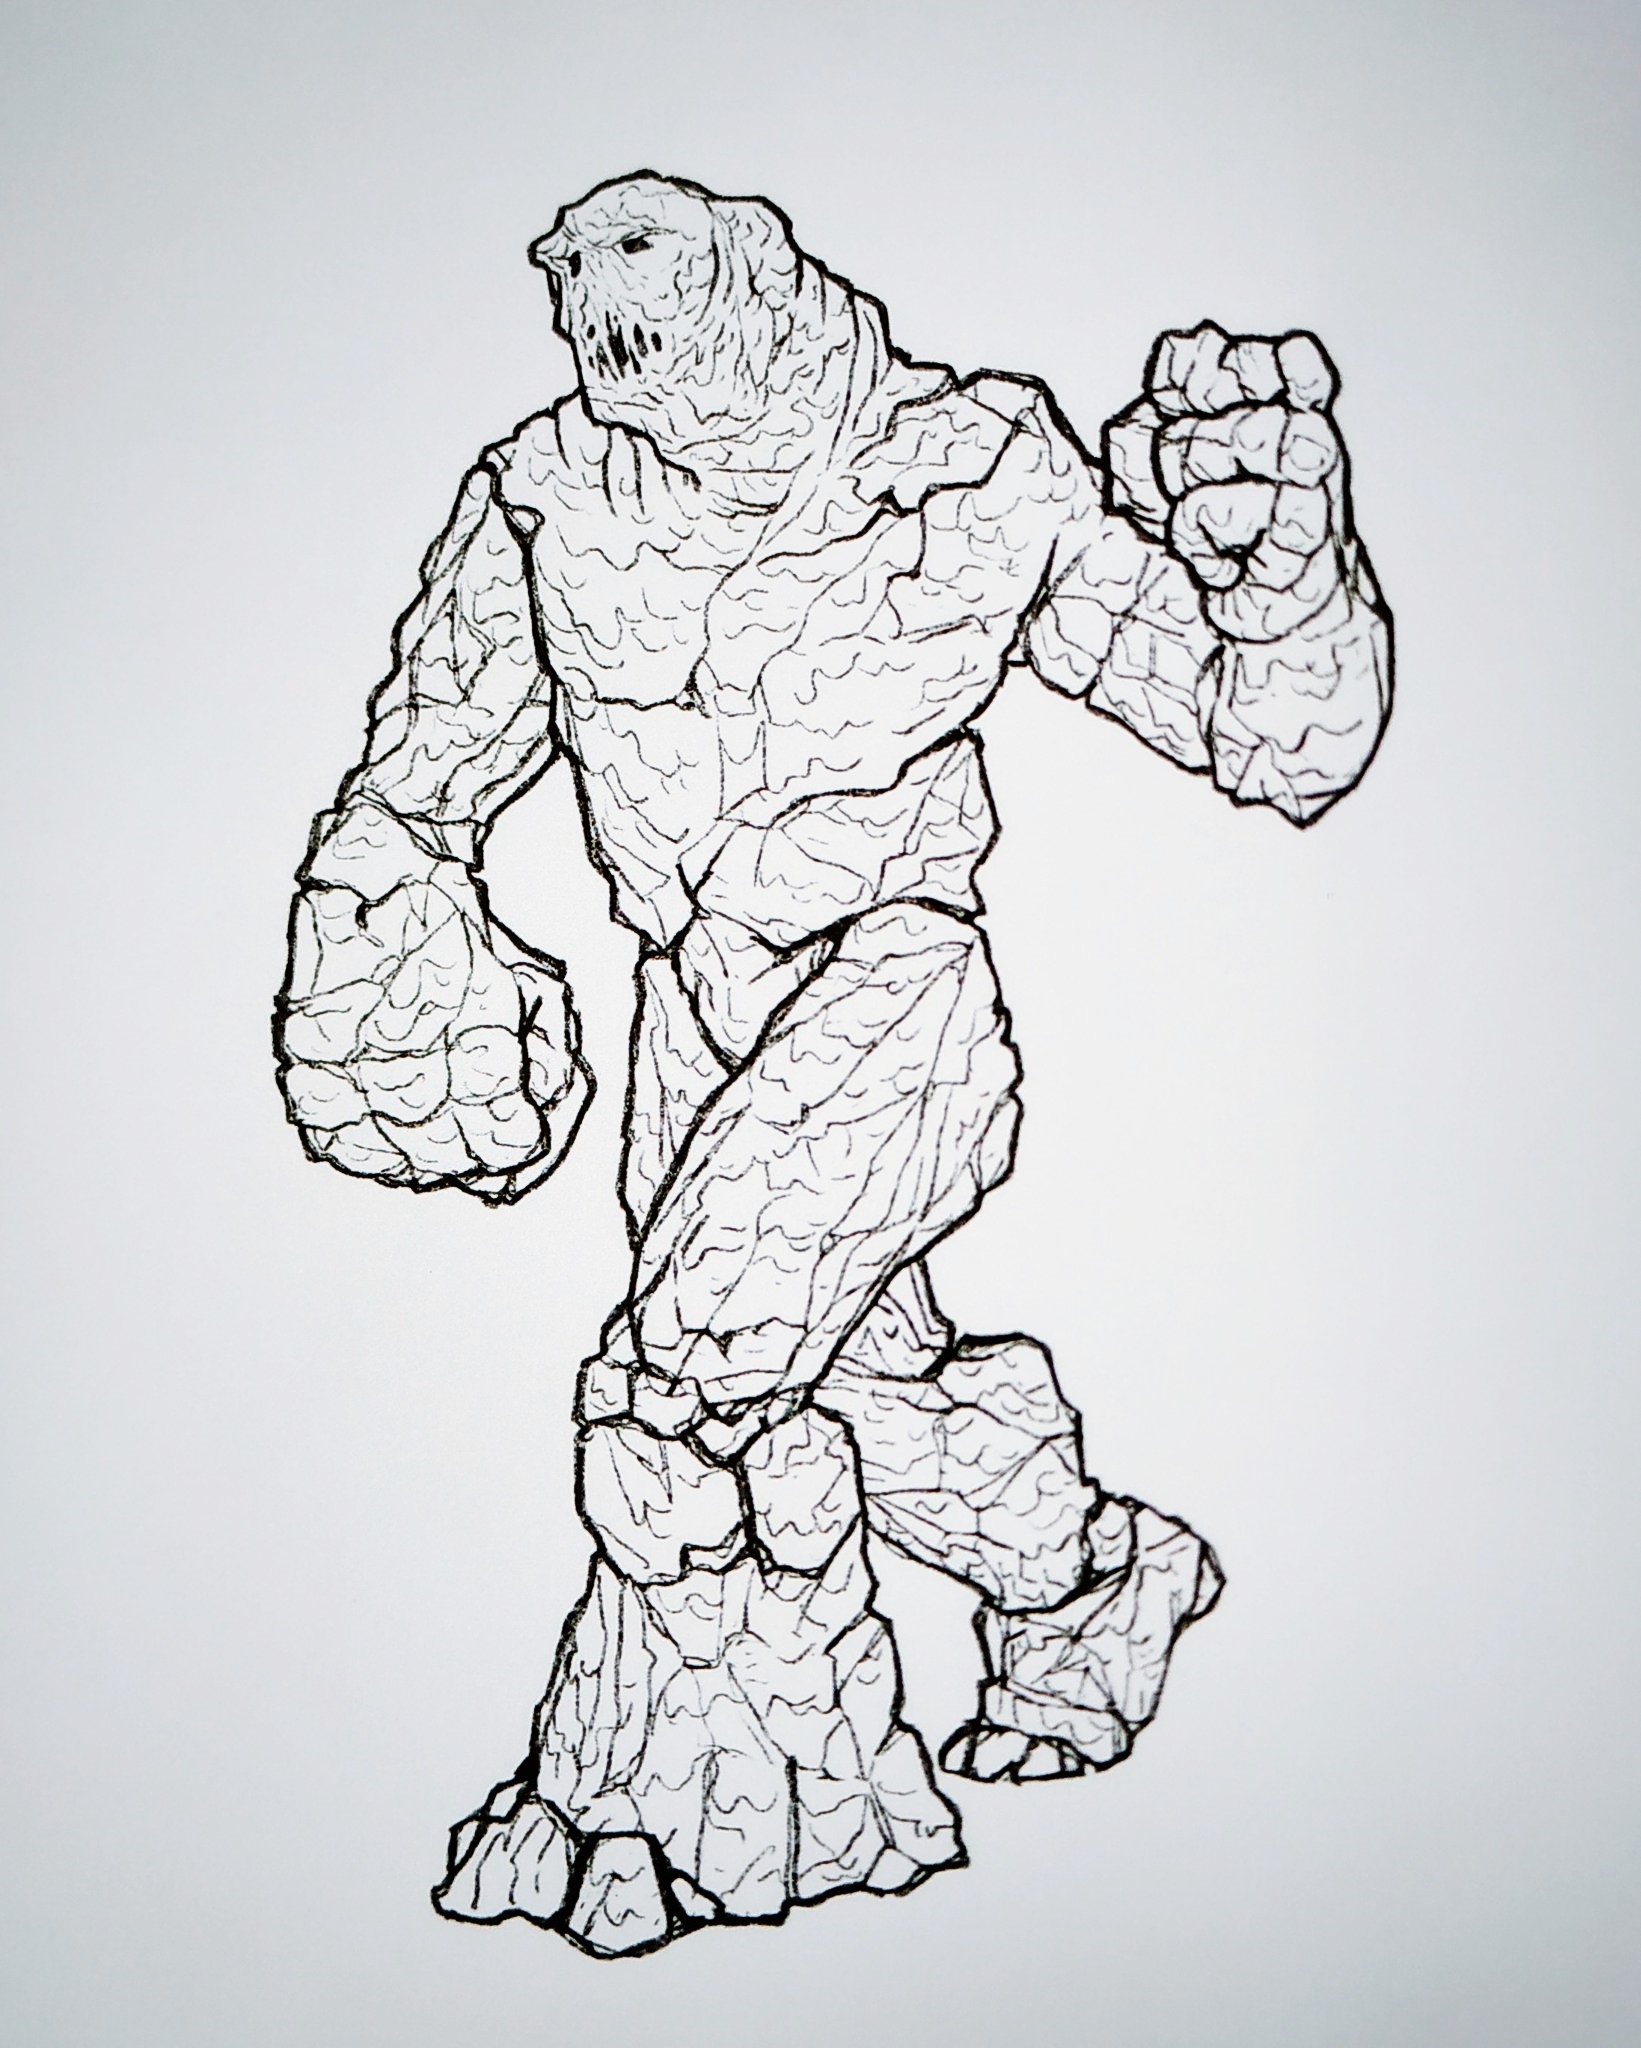 Sam the educational dm on x clay golem artist pedro a alberto illustration pedroaalberto on he has worked his way through the monstermanual some great pictures perfect for coloring dnd ttrpg